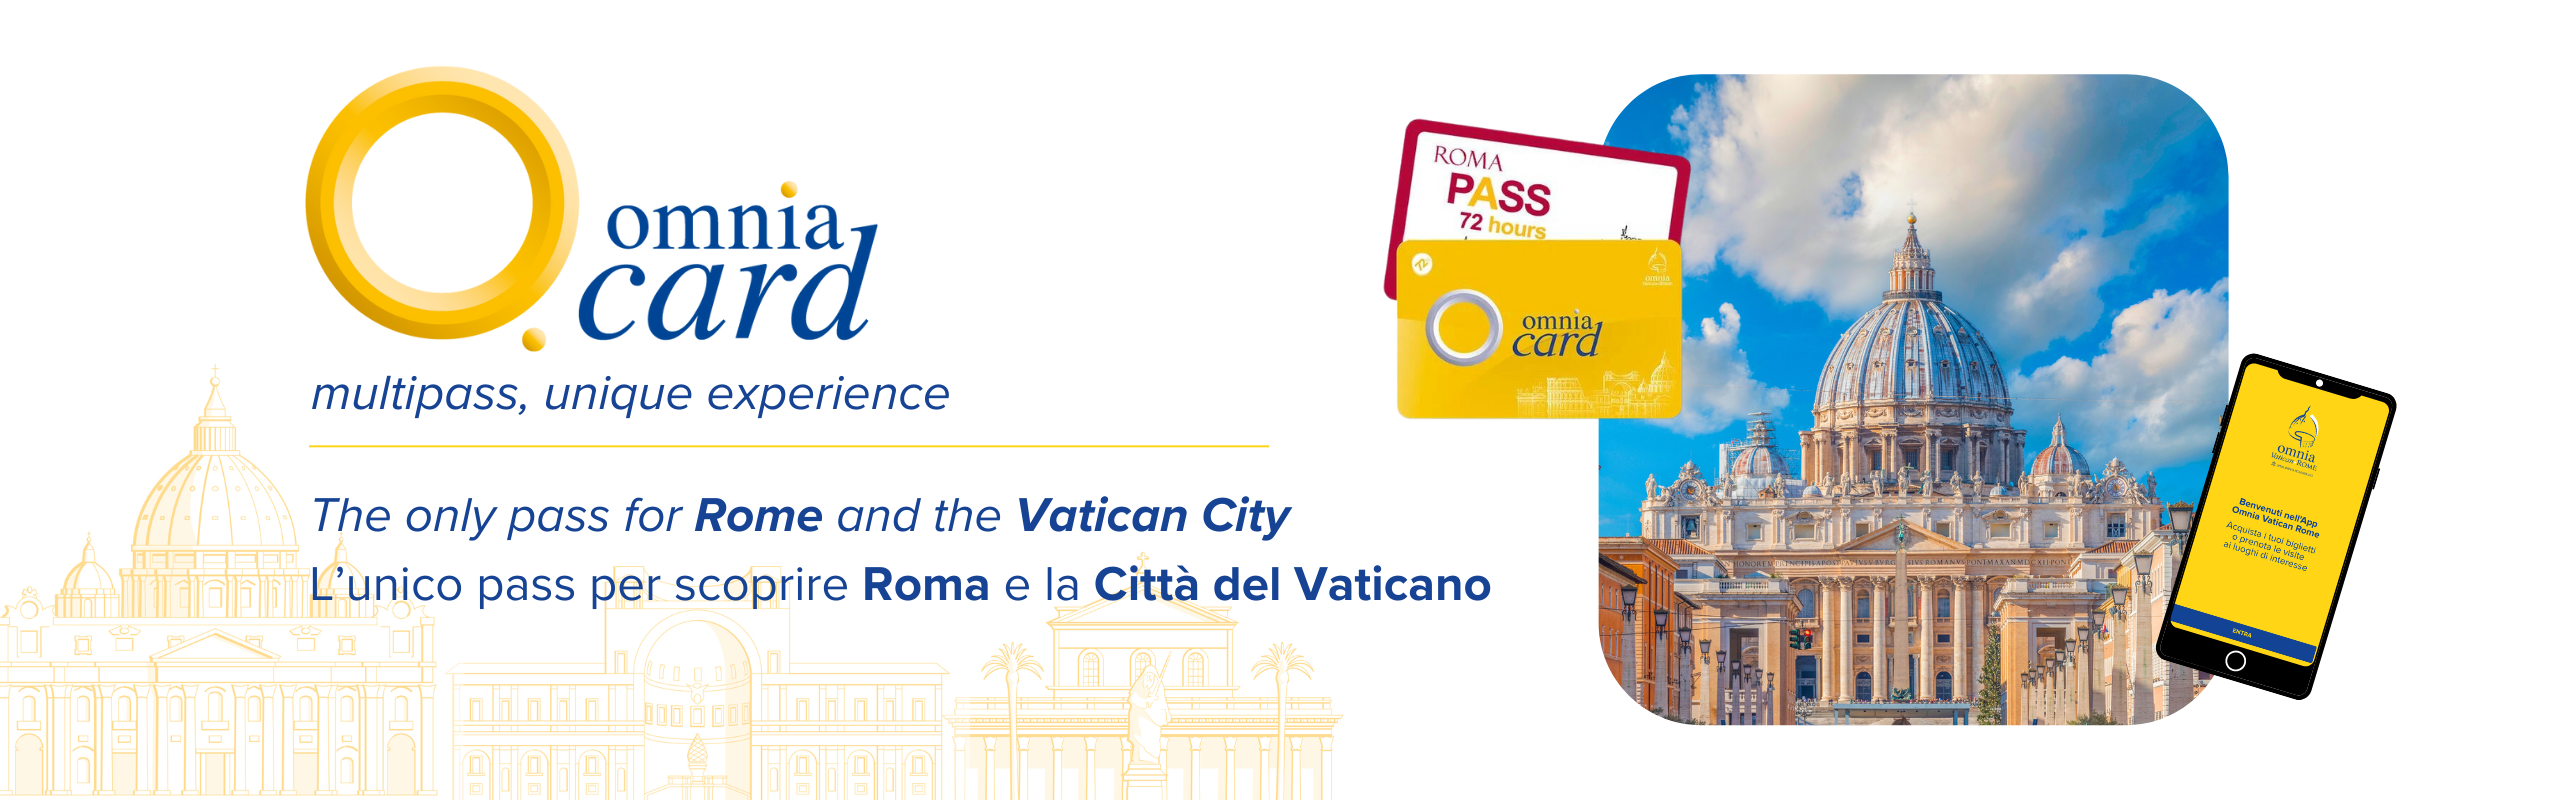 Omnia Card 72 hours: 3 day pass for Rome and Vatican tour